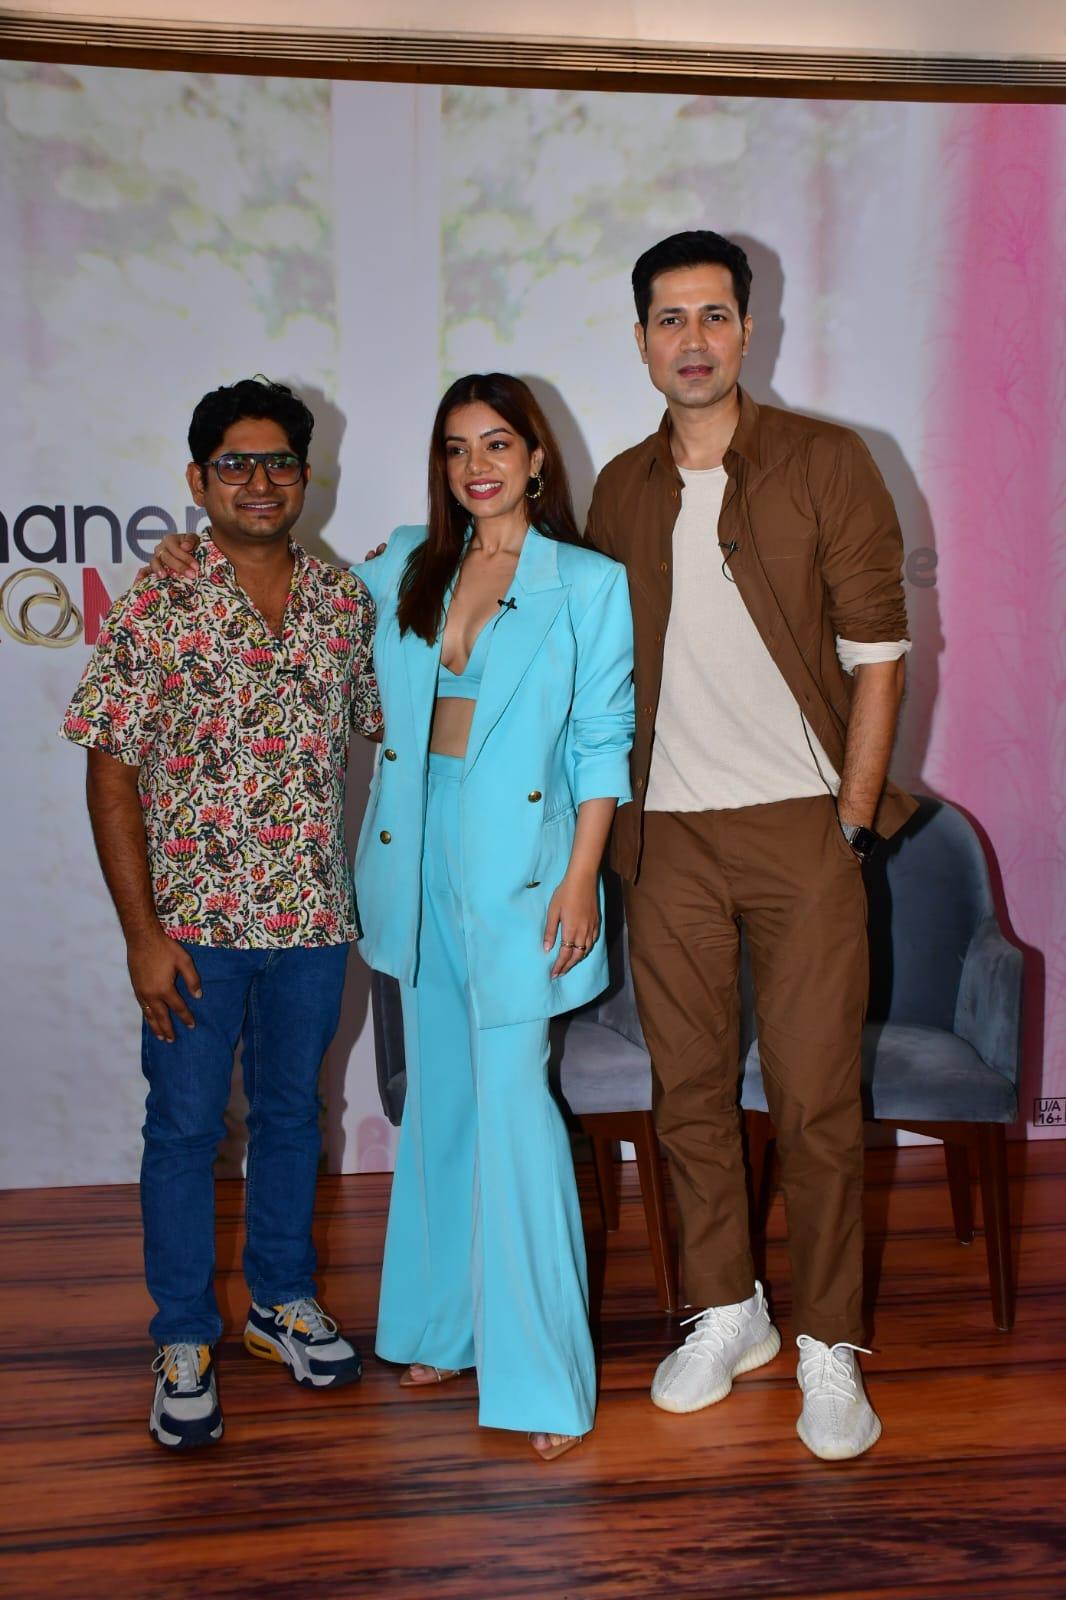 Sumeet Vyas, Nidhi Singh and Shreyansh Pandey were clicked as they went to promote the new season of Permanent Roommates